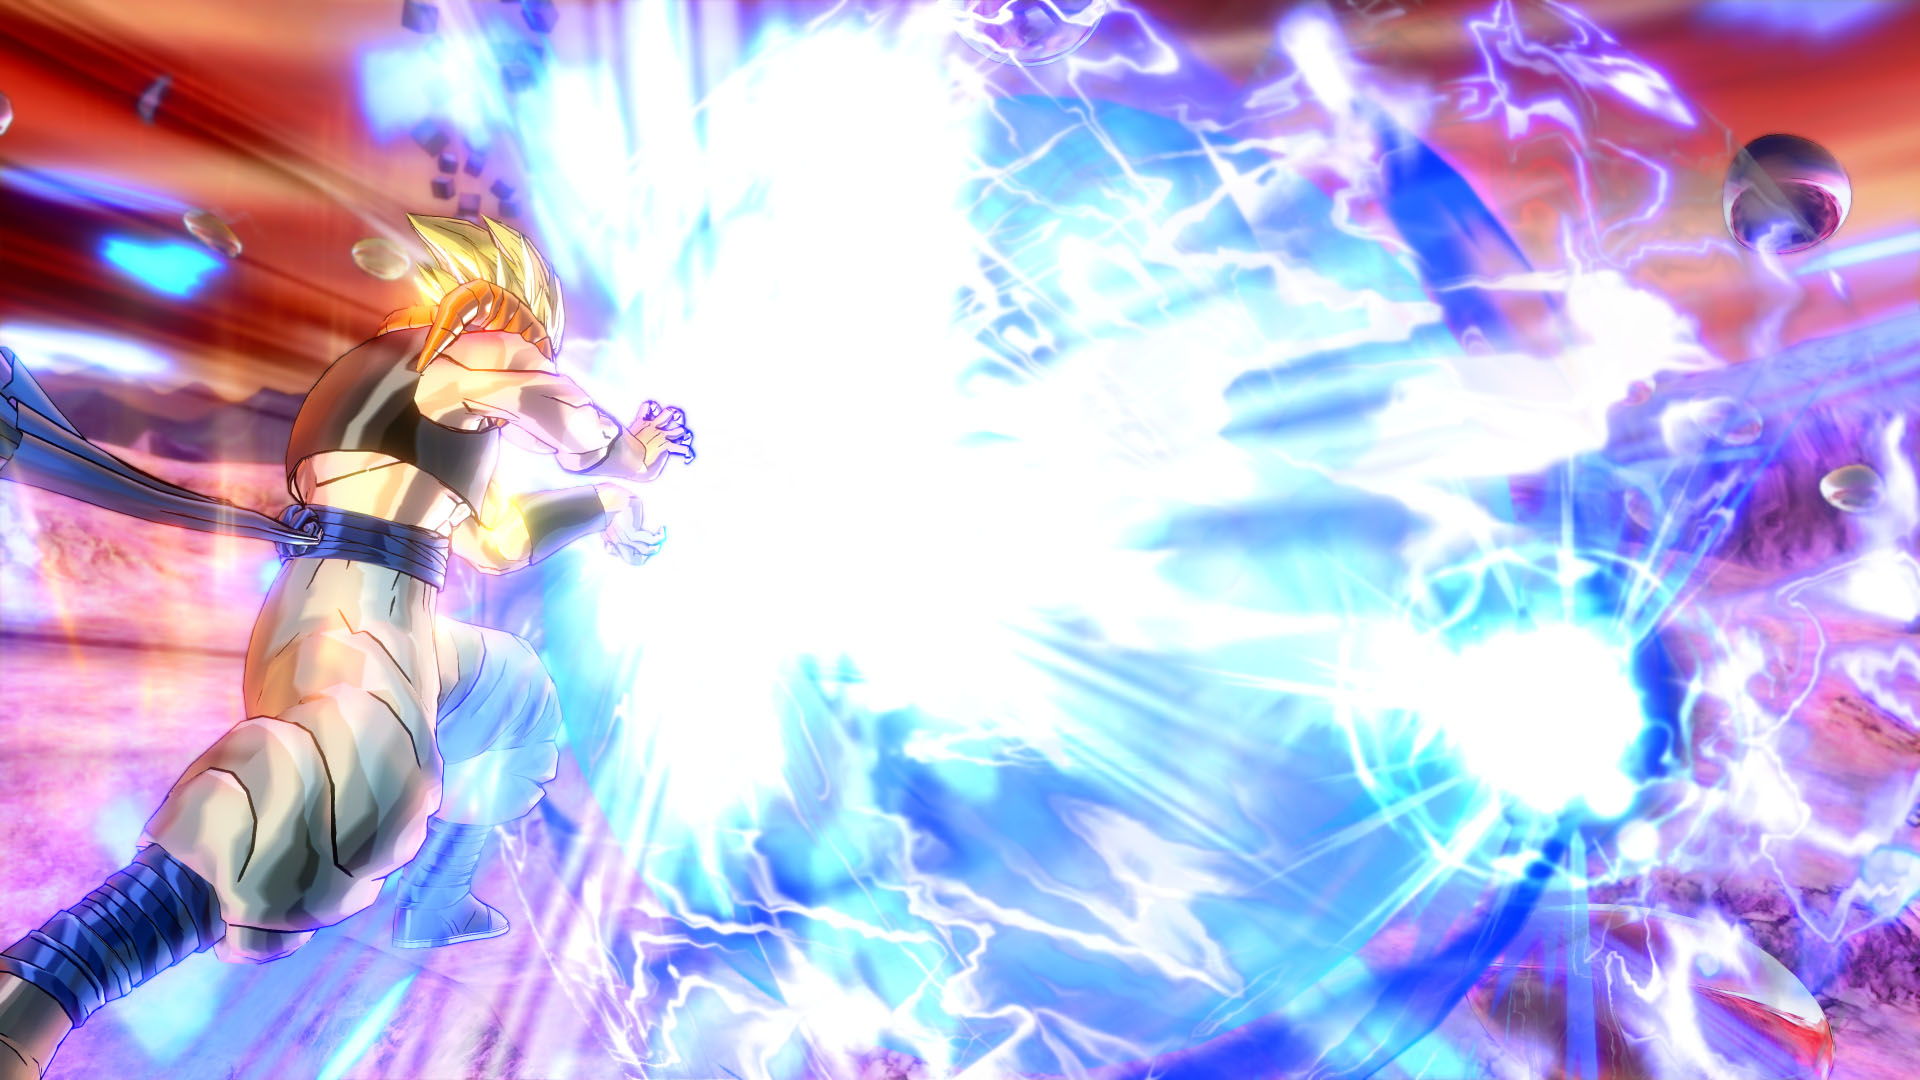 Best anime games: Dragon Ball Xenoverse 2. Image shows two characters shooting huge beams of energy at each other.